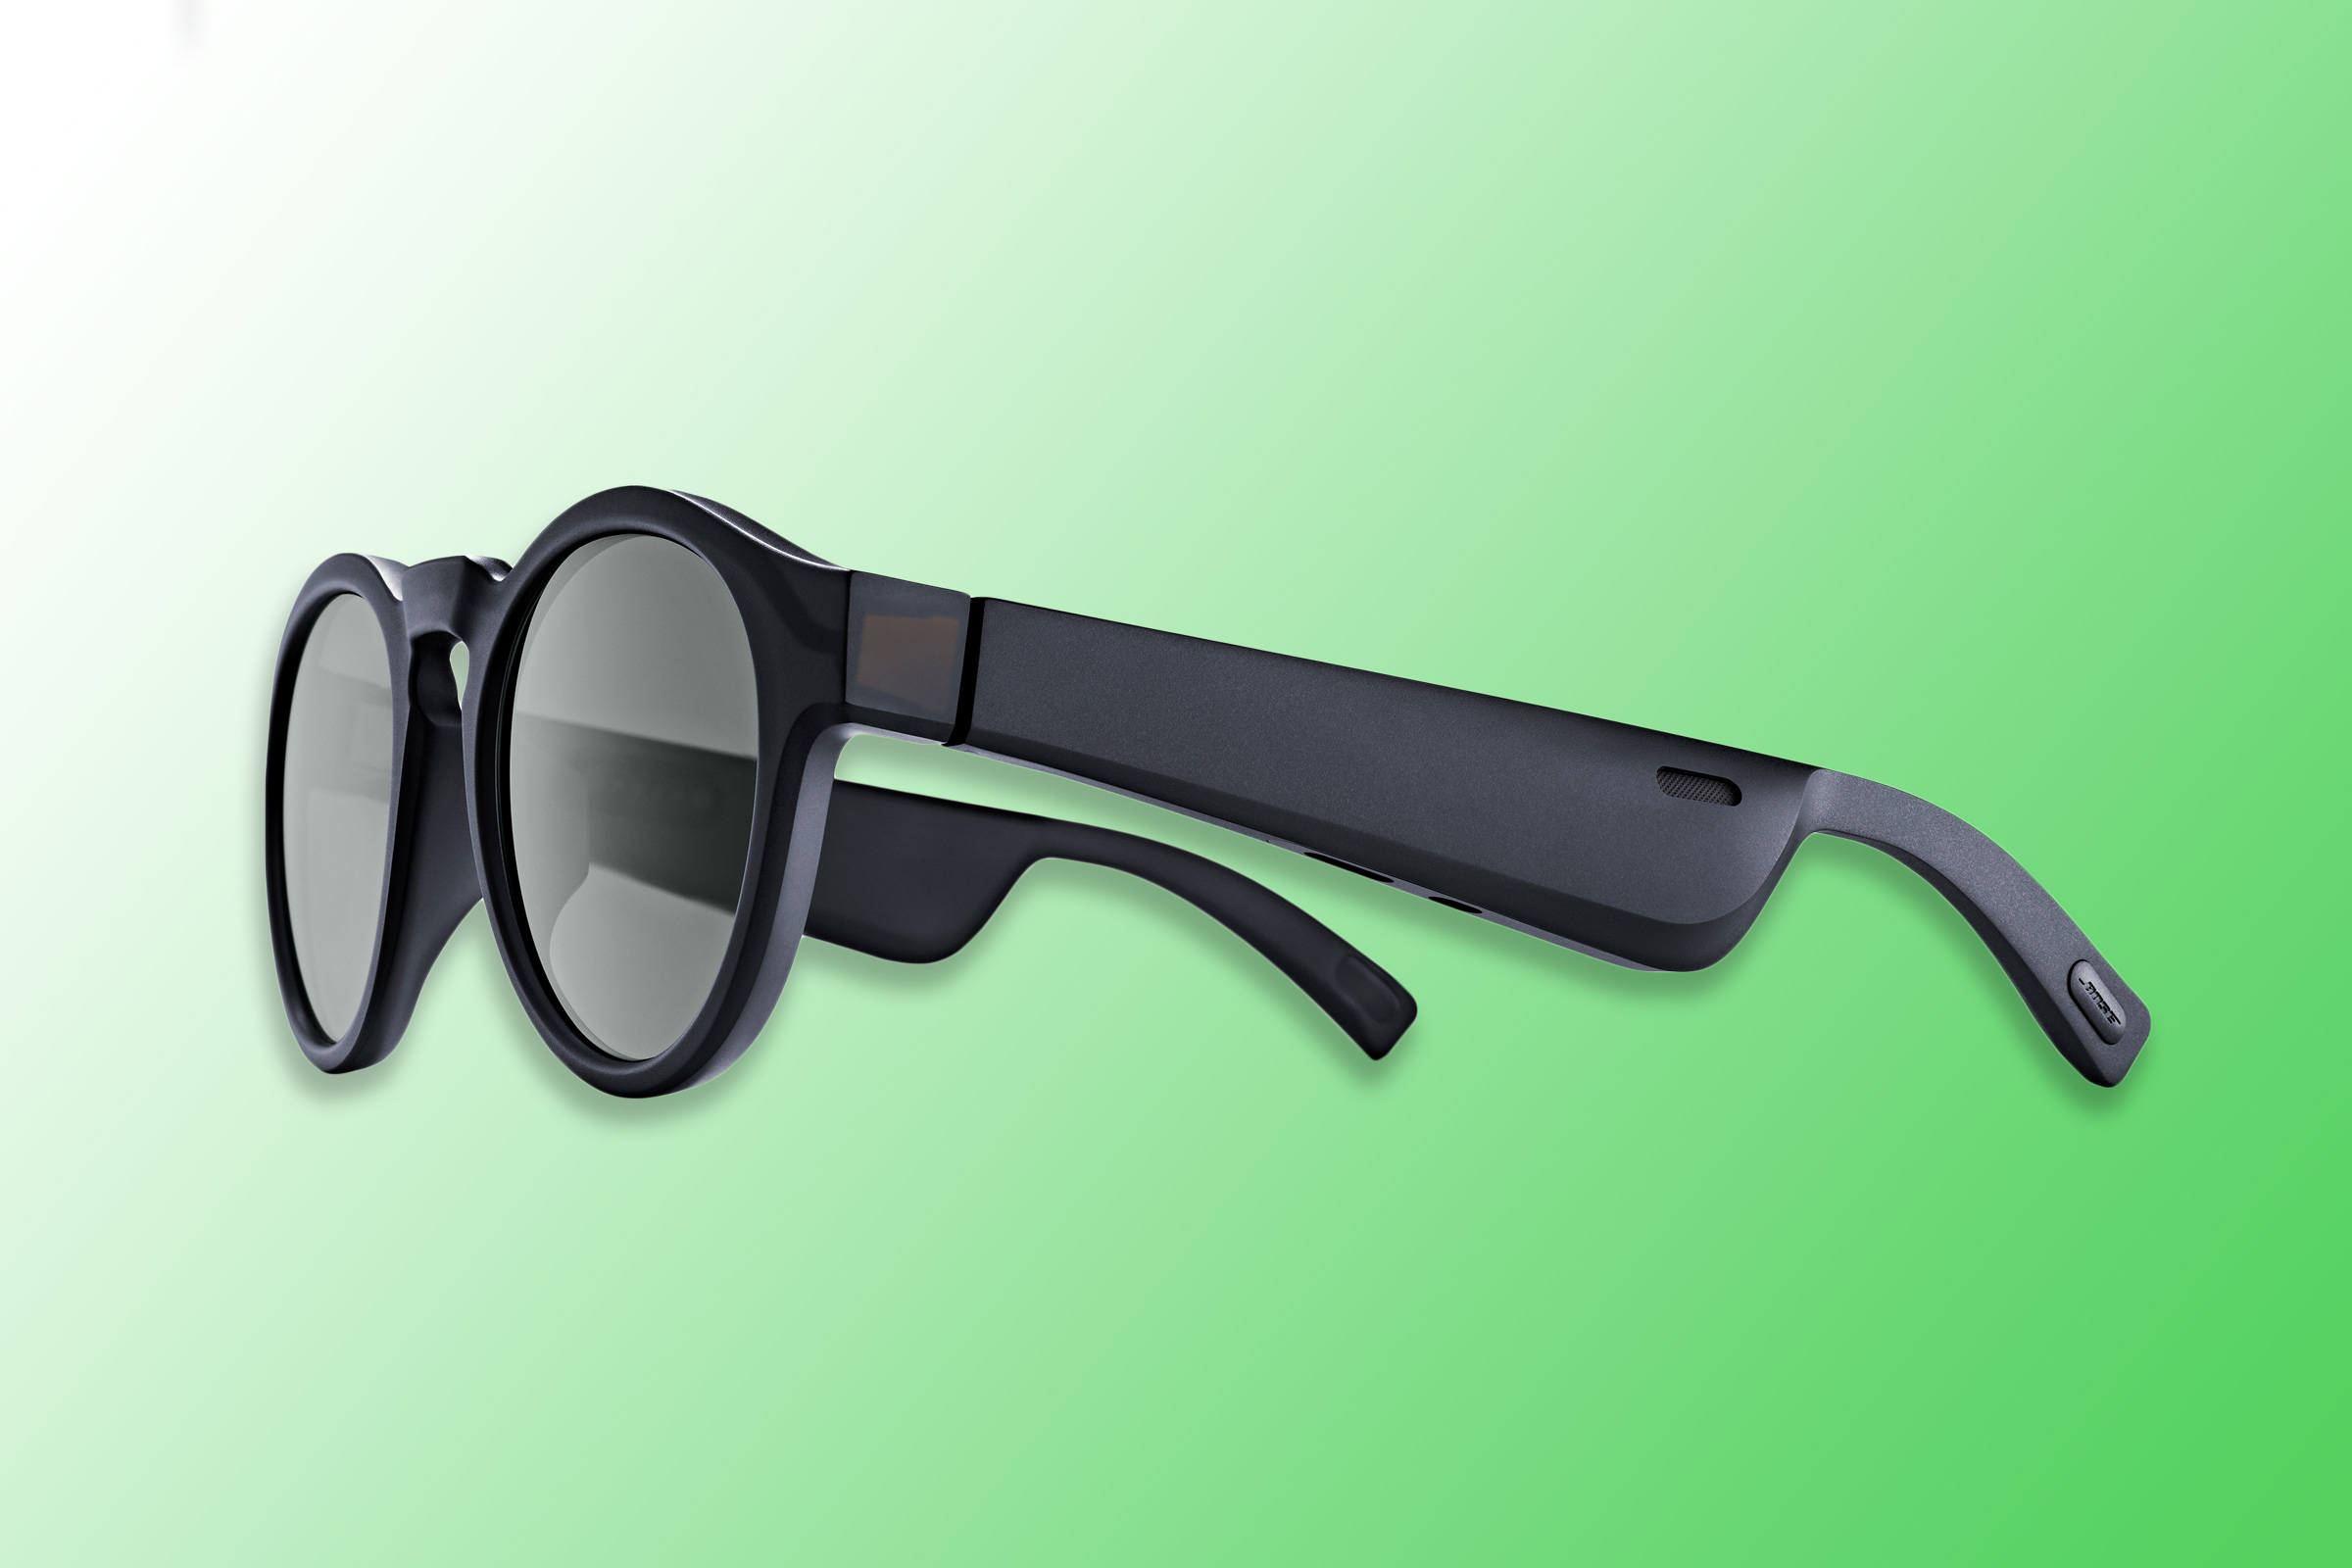 Bose Frames Review: Sunglasses With 